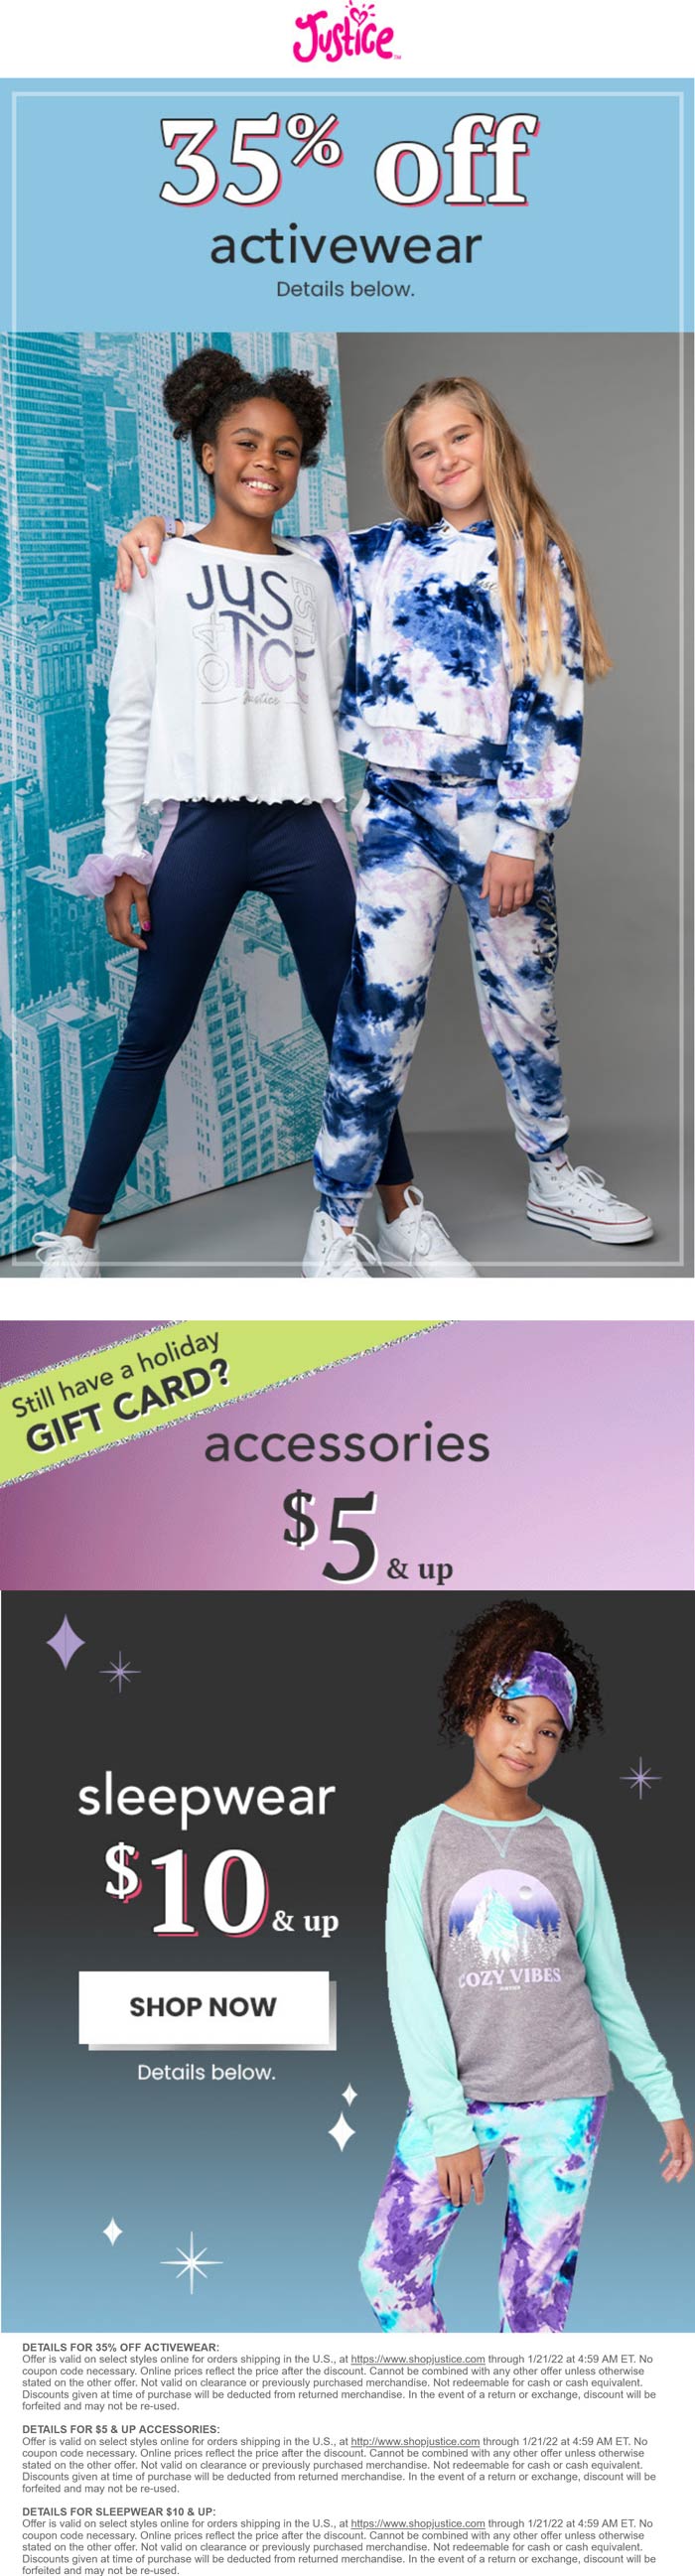 Justice stores Coupon  35% off activewear at Justice #justice 